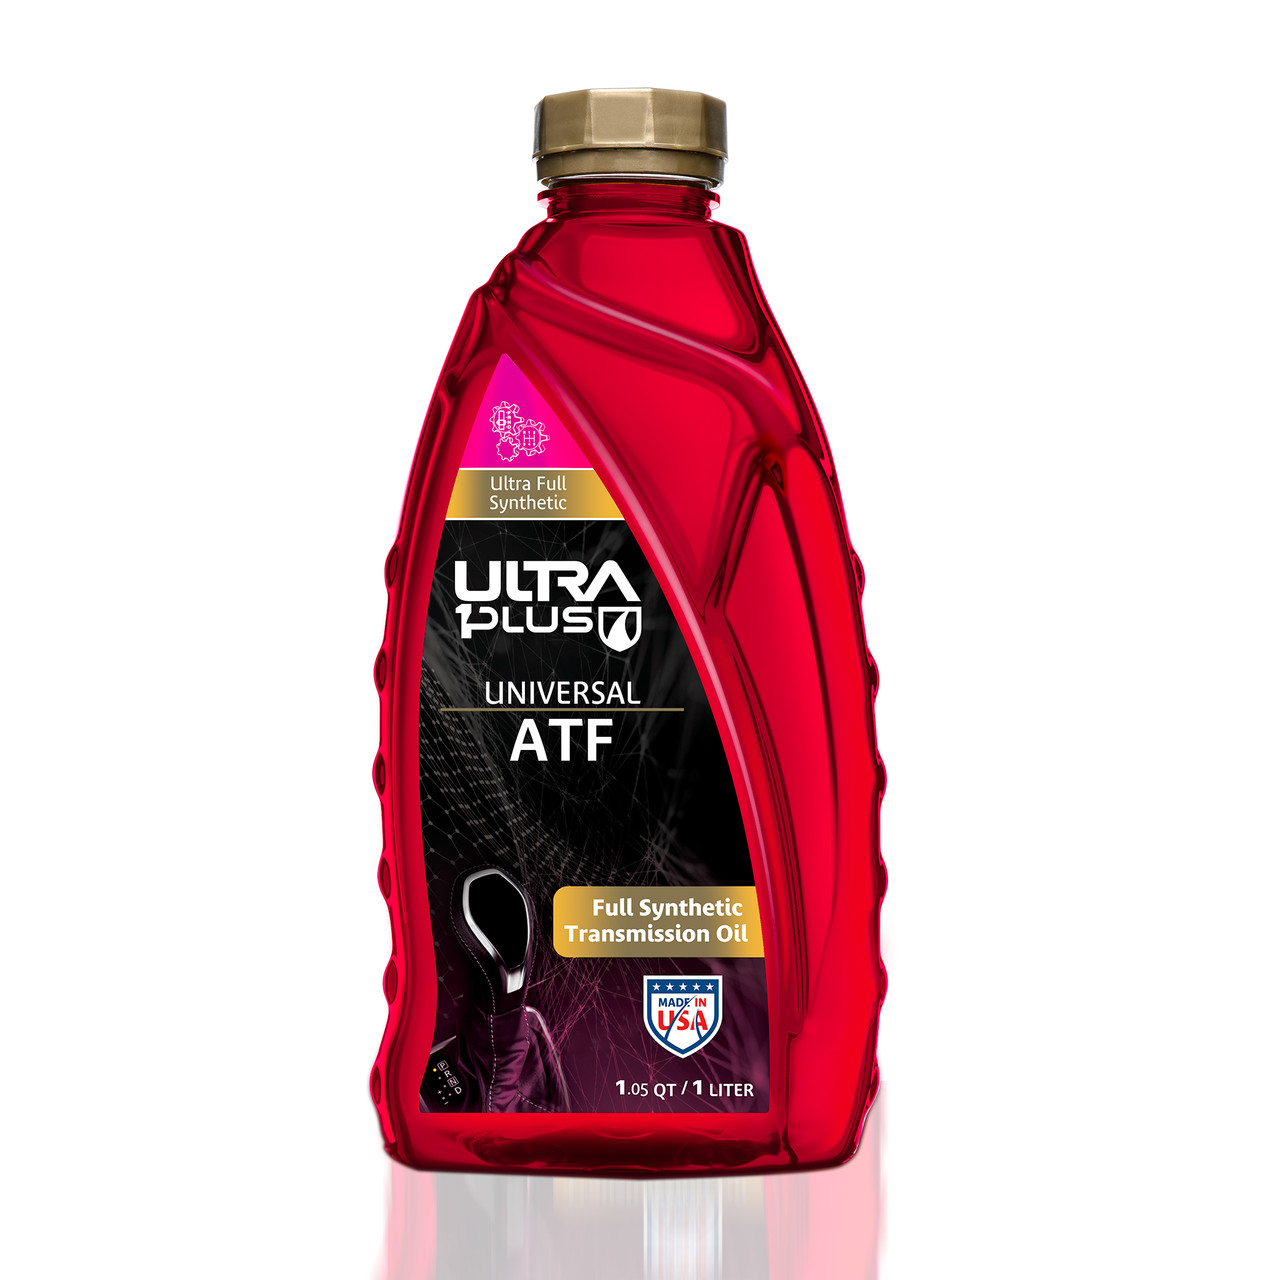 Ultra1Plus  ATF Universal Full Synthetic Transmission Fluid